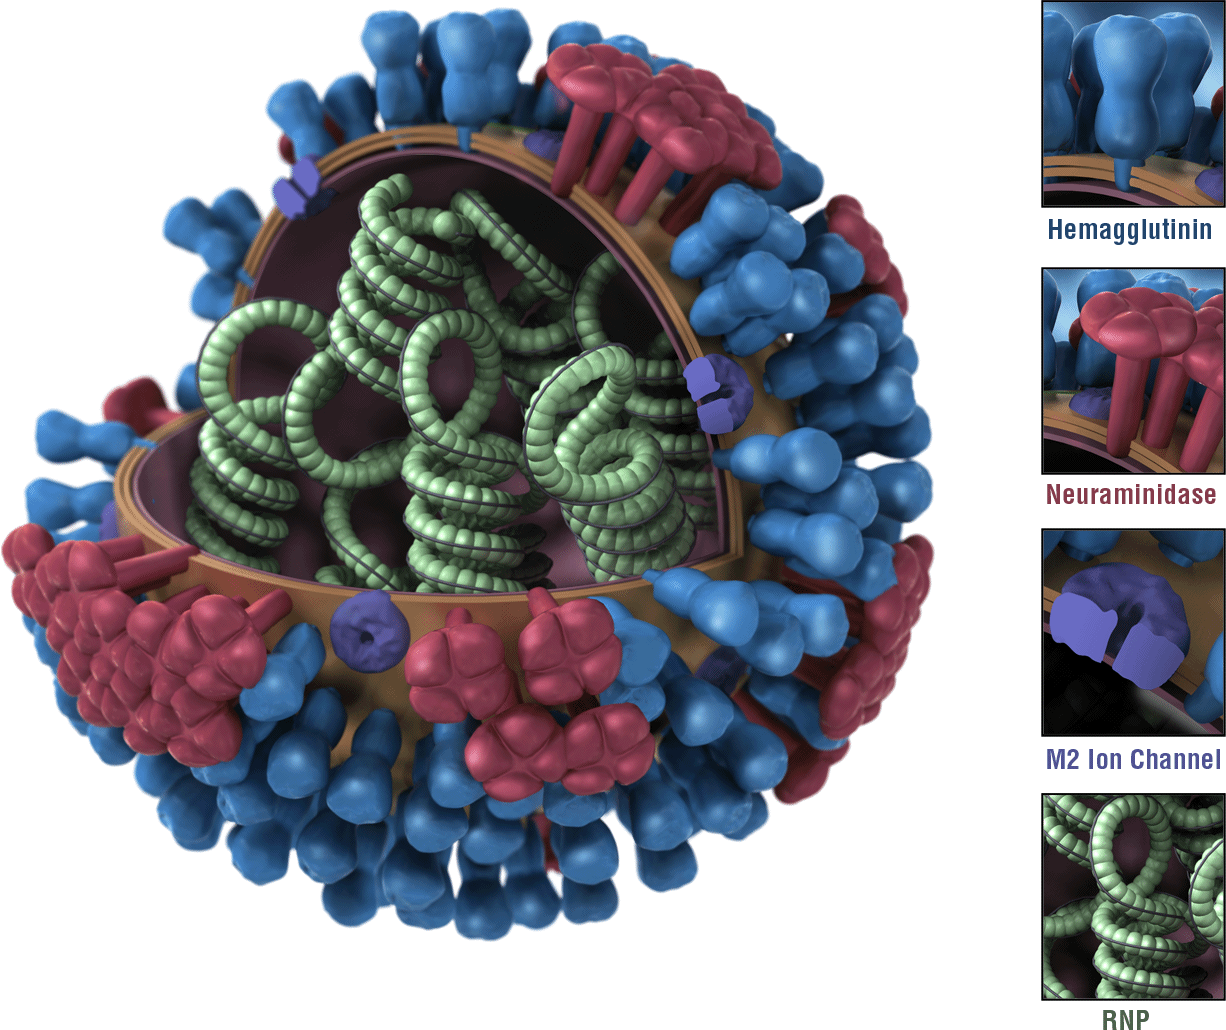 Pics of the flu virus and some its components | ScienceBlogs